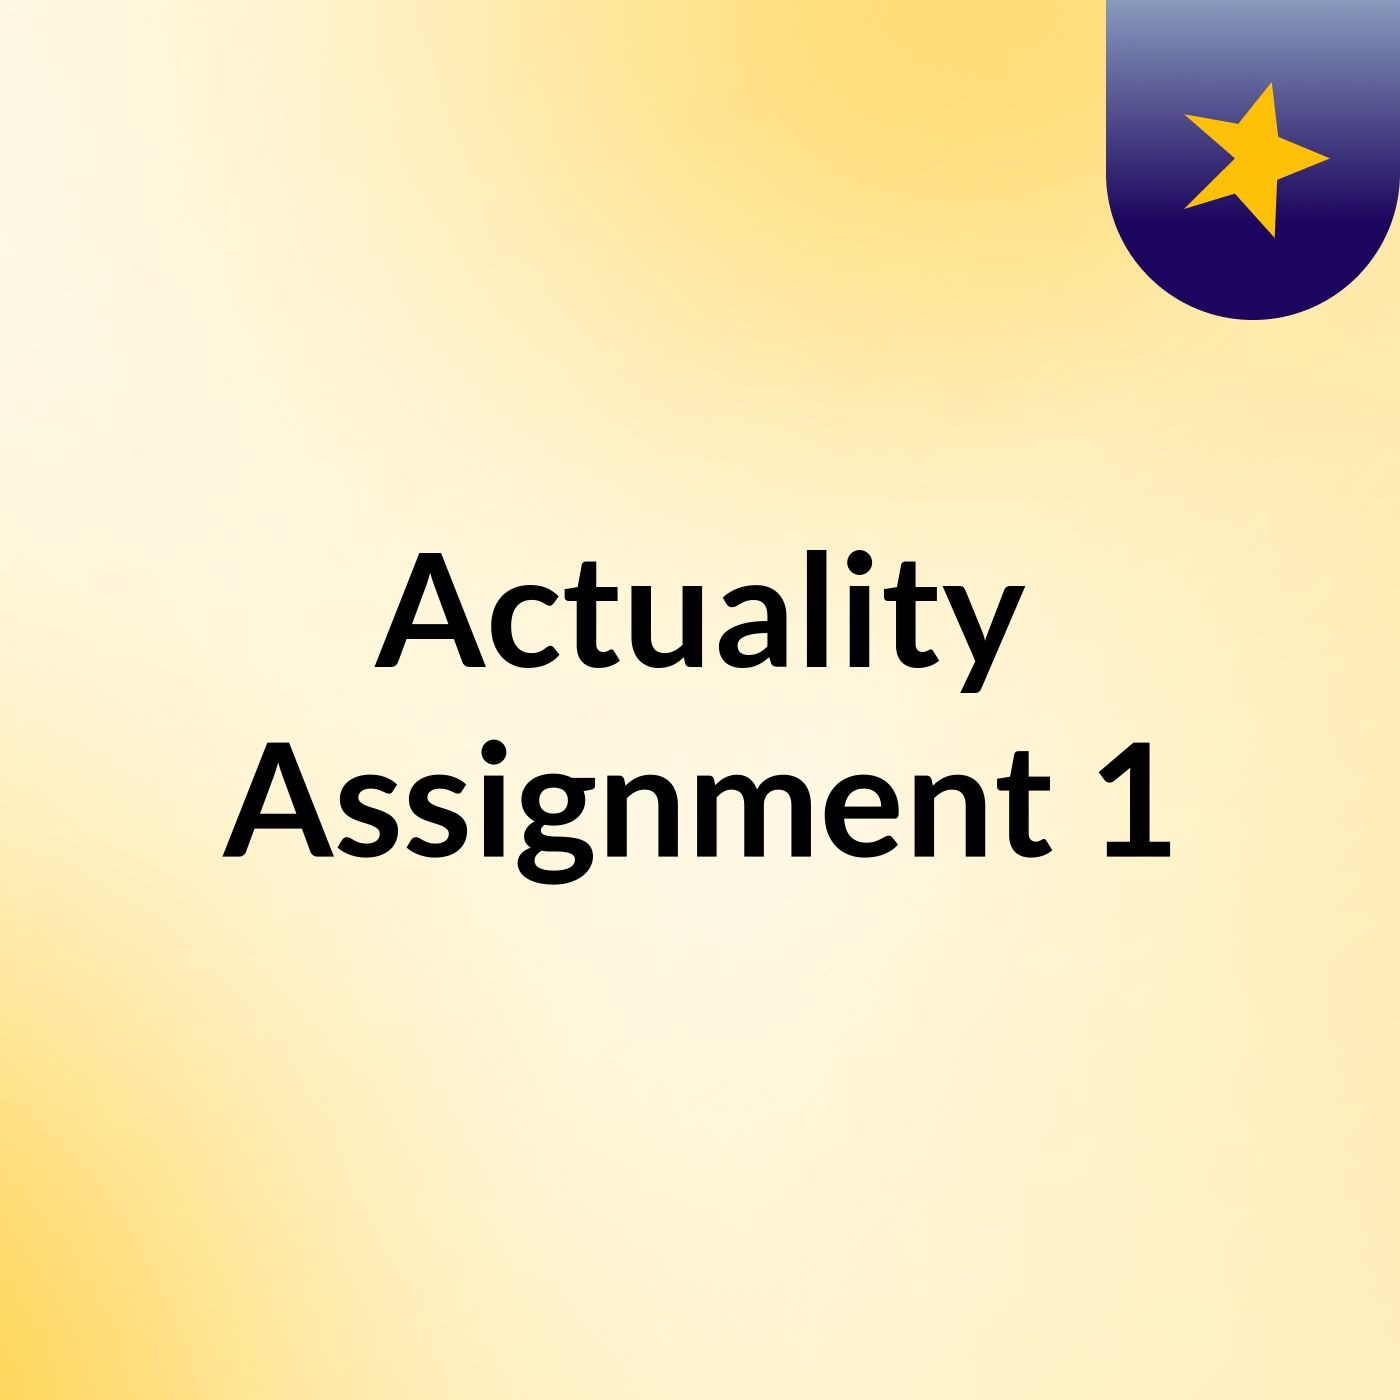 Episode 14 - Actuality Assignment 1